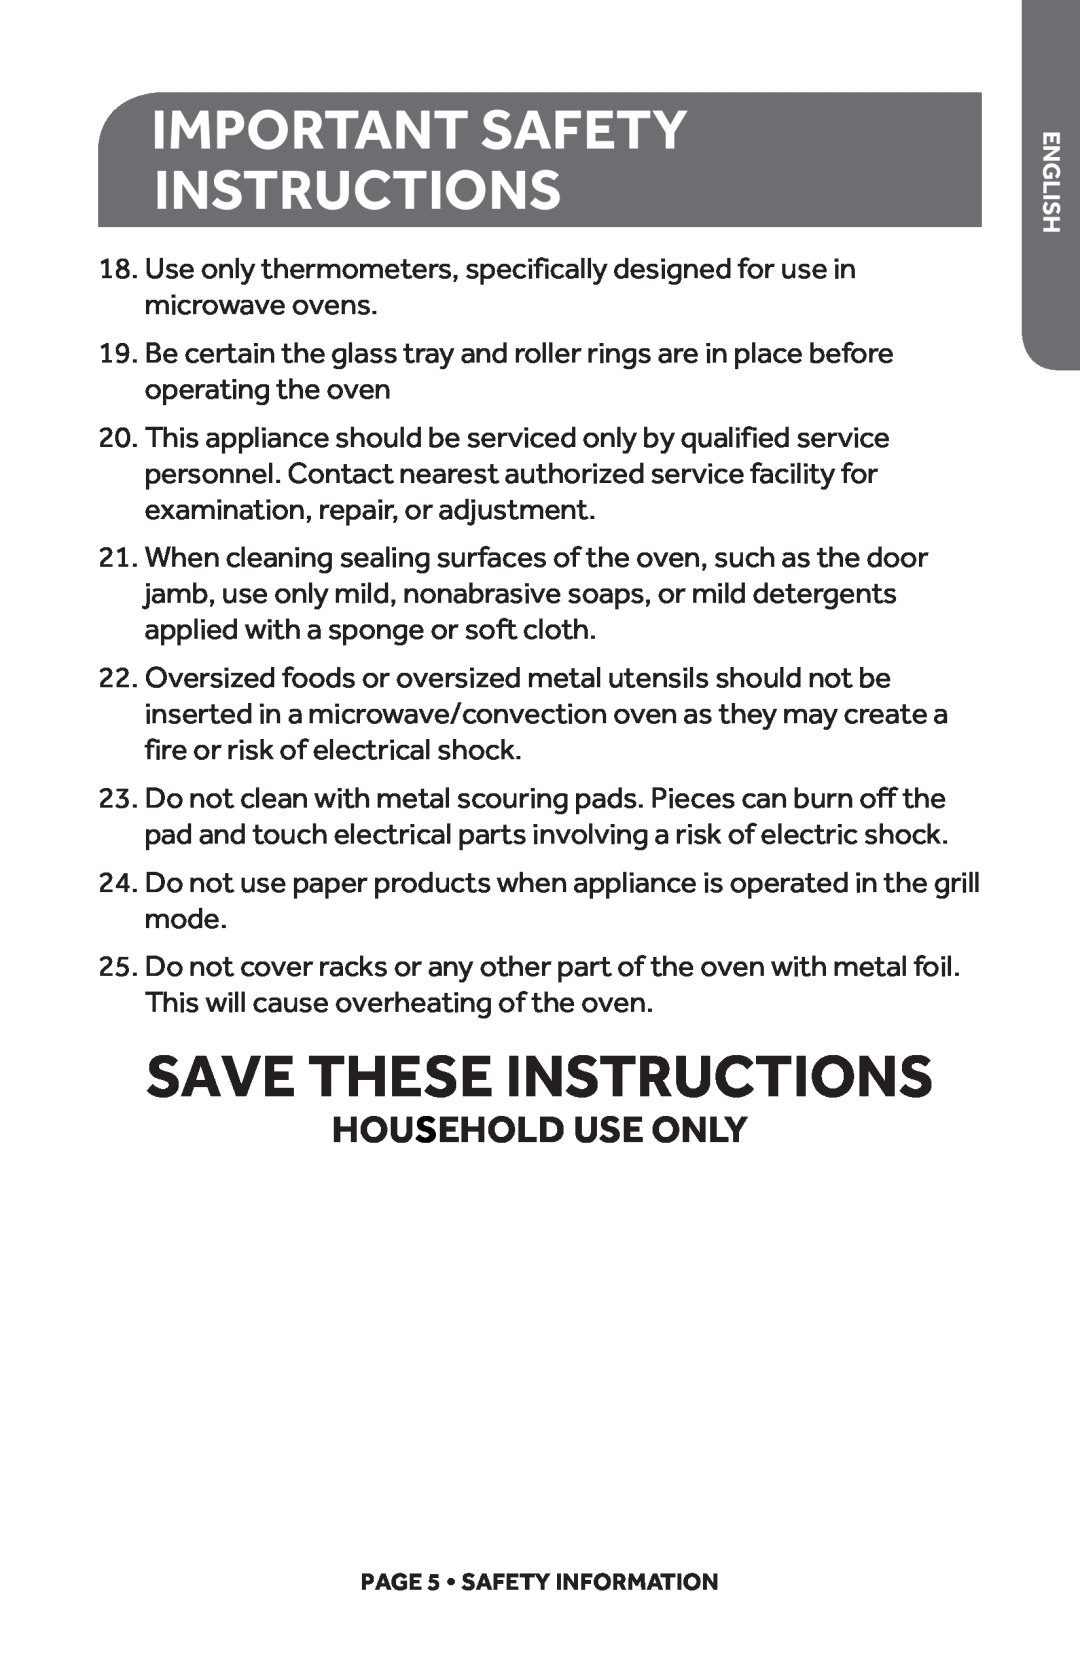 Haier HMC1285SESS user manual Save These Instructions, Household Use Only, Important Safety Instructions 